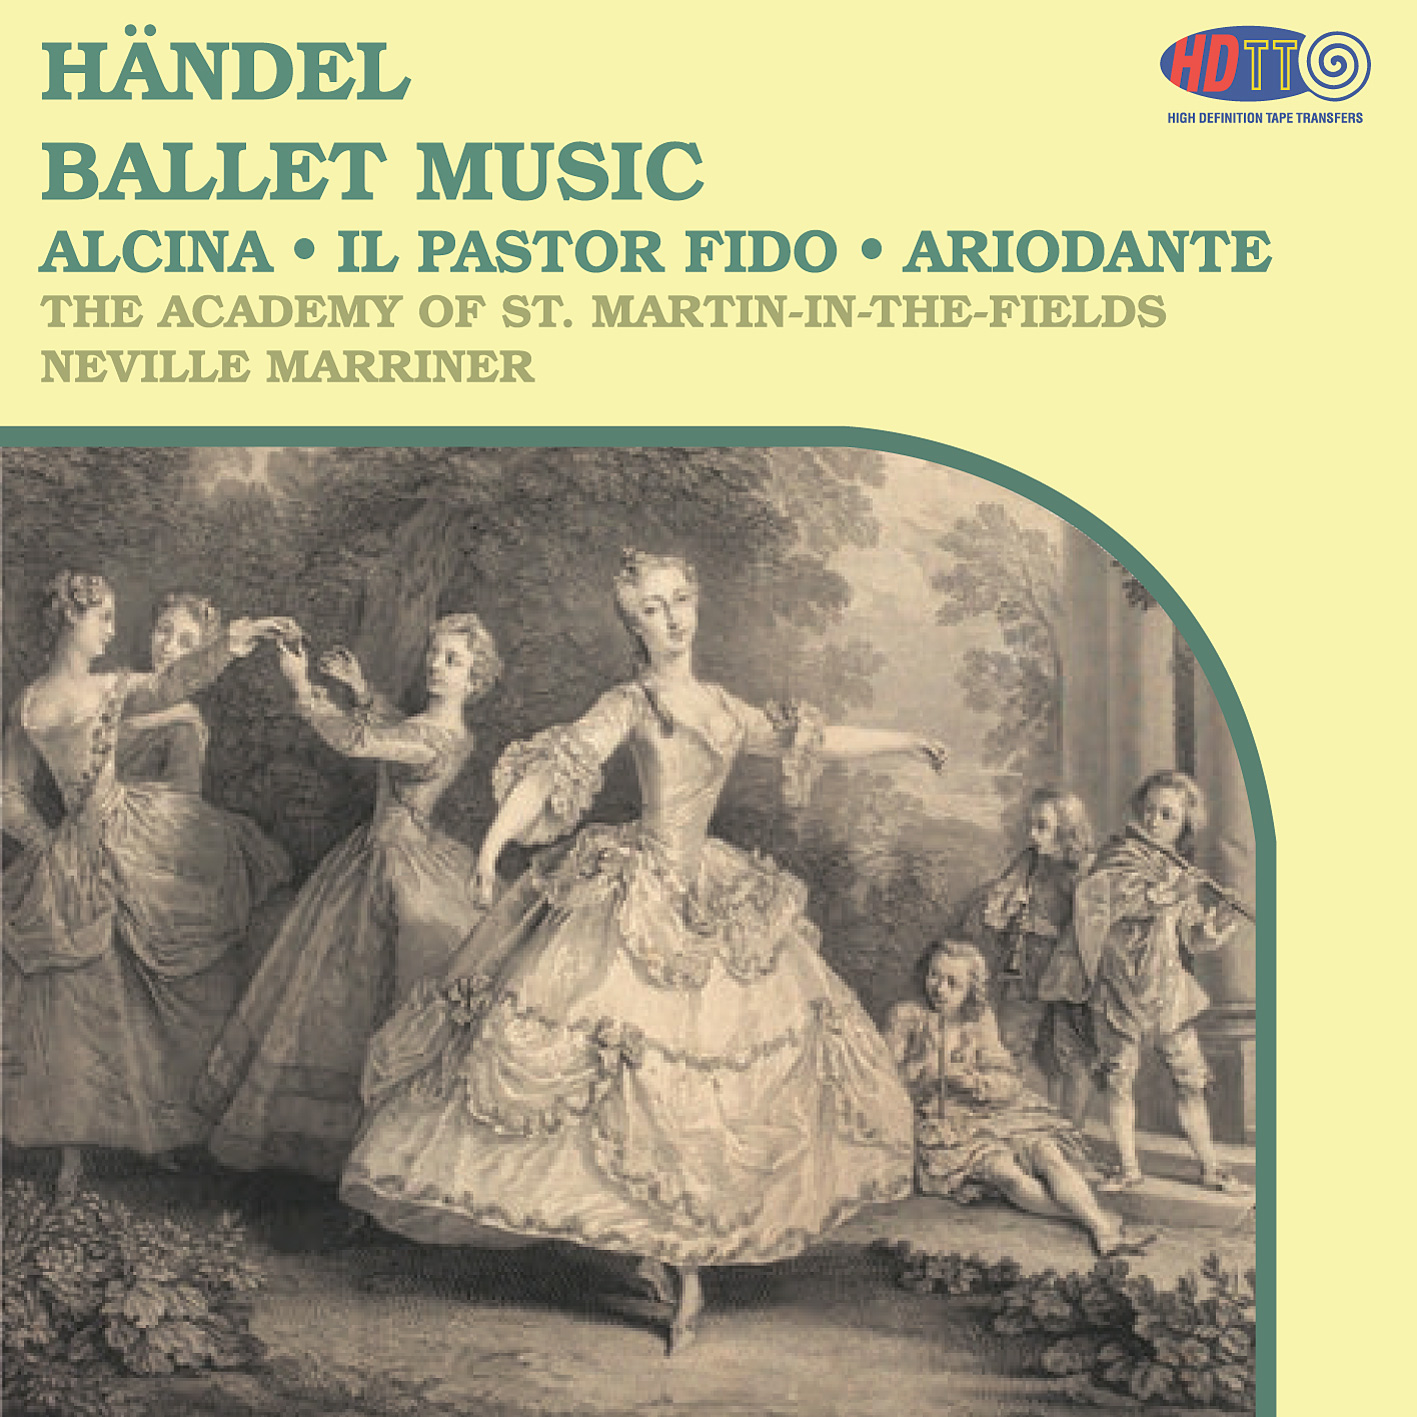 Sir Neville Marriner, The Academy Of St. Martin-in-the-Fields – G.F. Handel: Ballet Music (1972/2018) DSF DSD128 + Hi-Res FLAC